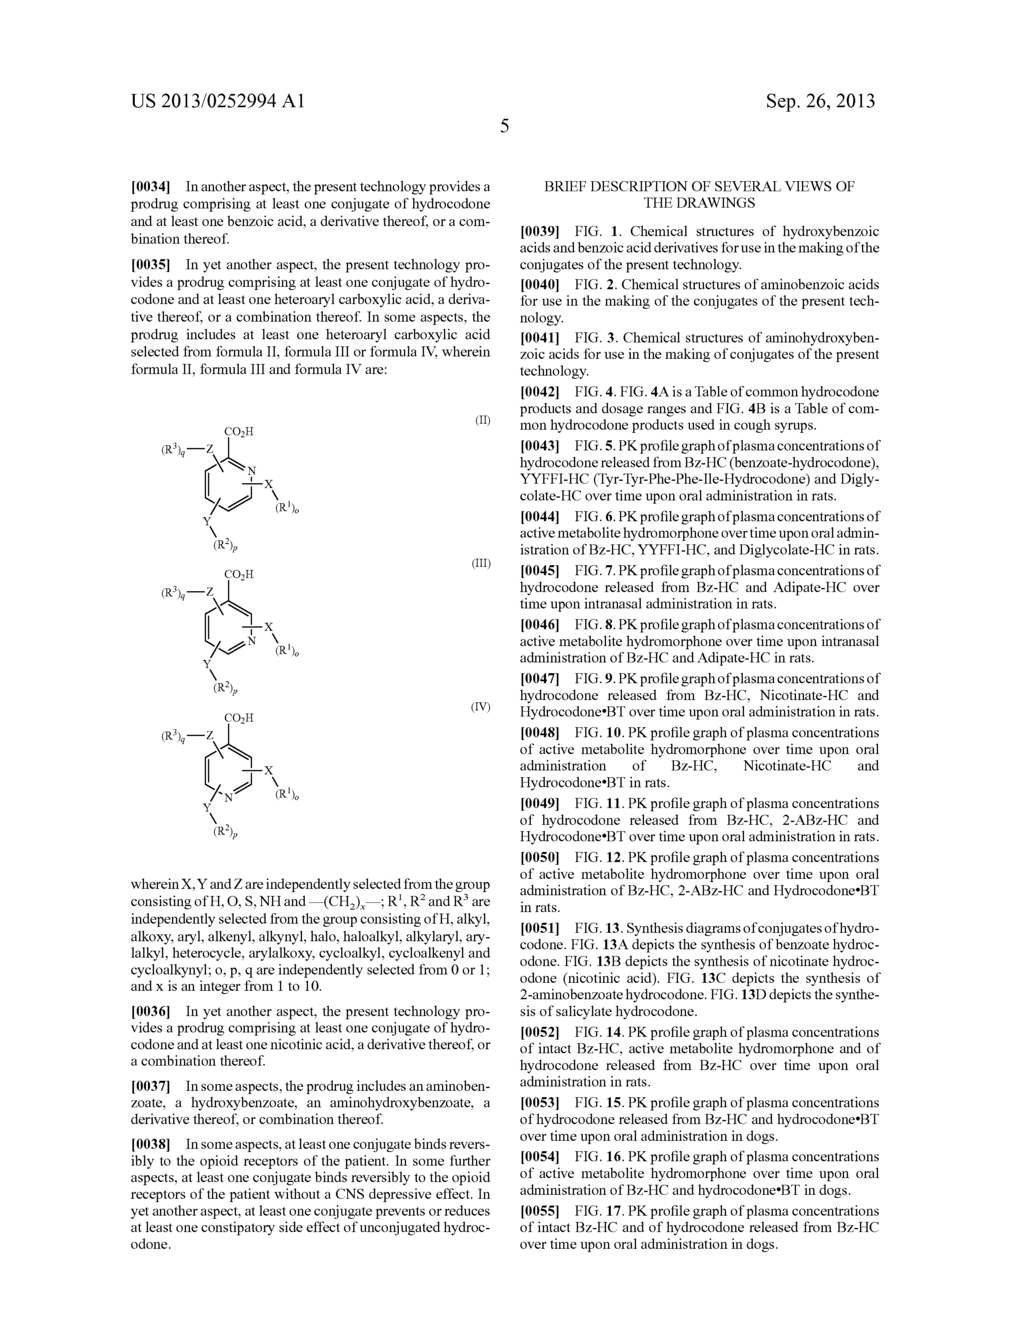 Benzoic Acid, Benzoic Acid Derivatives and Heteroaryl Carboxylic Acid     Conjugates of Hydrocodone, Prodrugs, Methods of Making and Use Thereof - diagram, schematic, and image 21